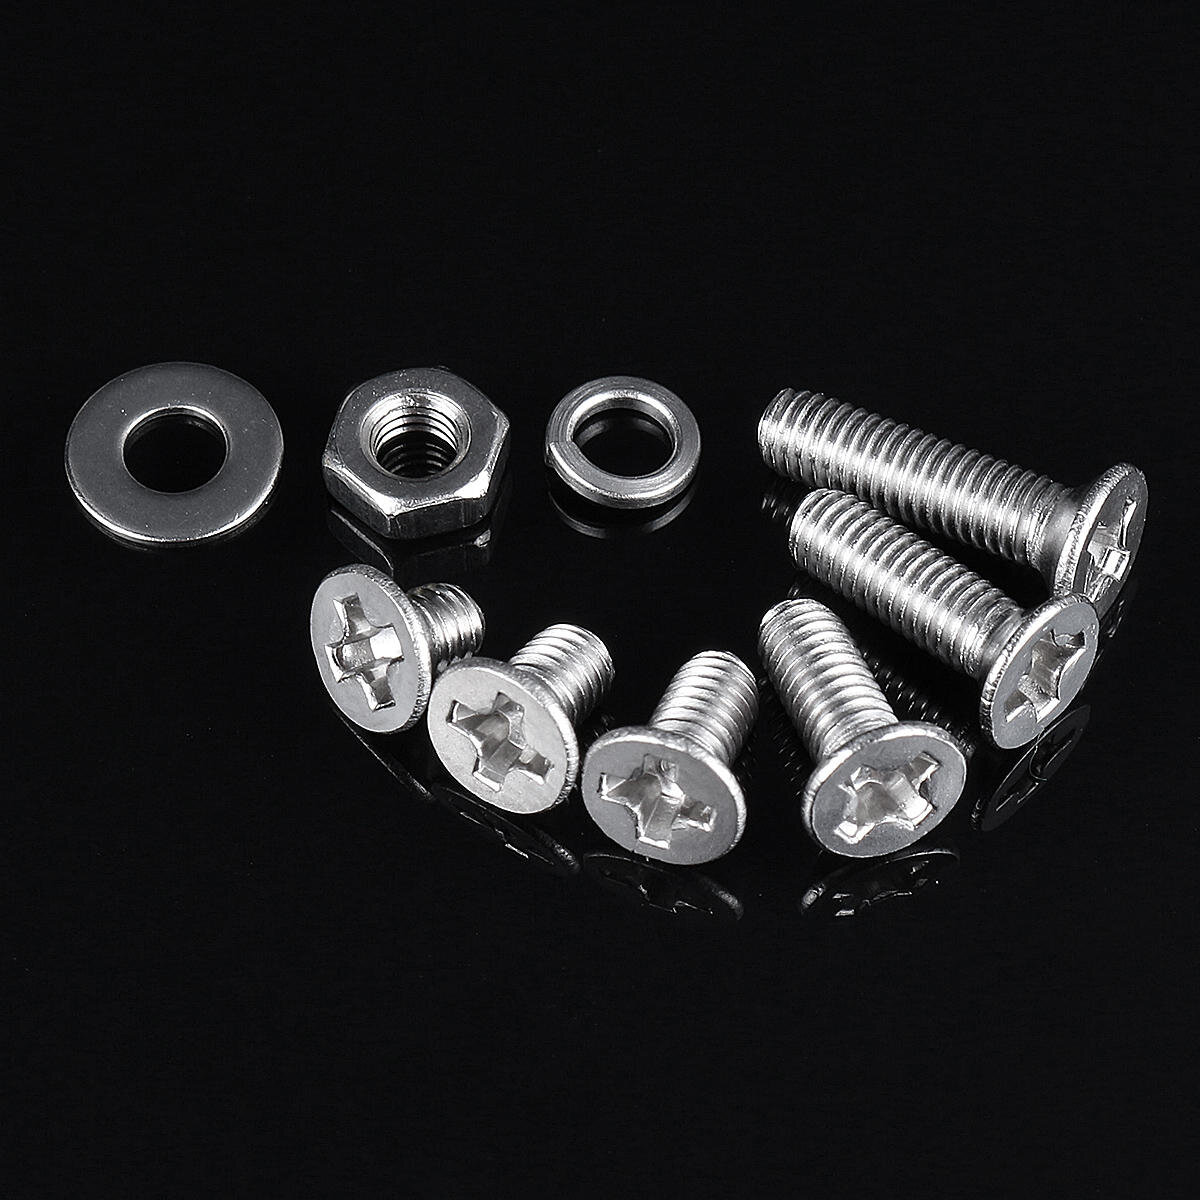 300pcs M3 304 Stainless Steel Phillips Screw Bolt & Hex Nuts Washers Assortment